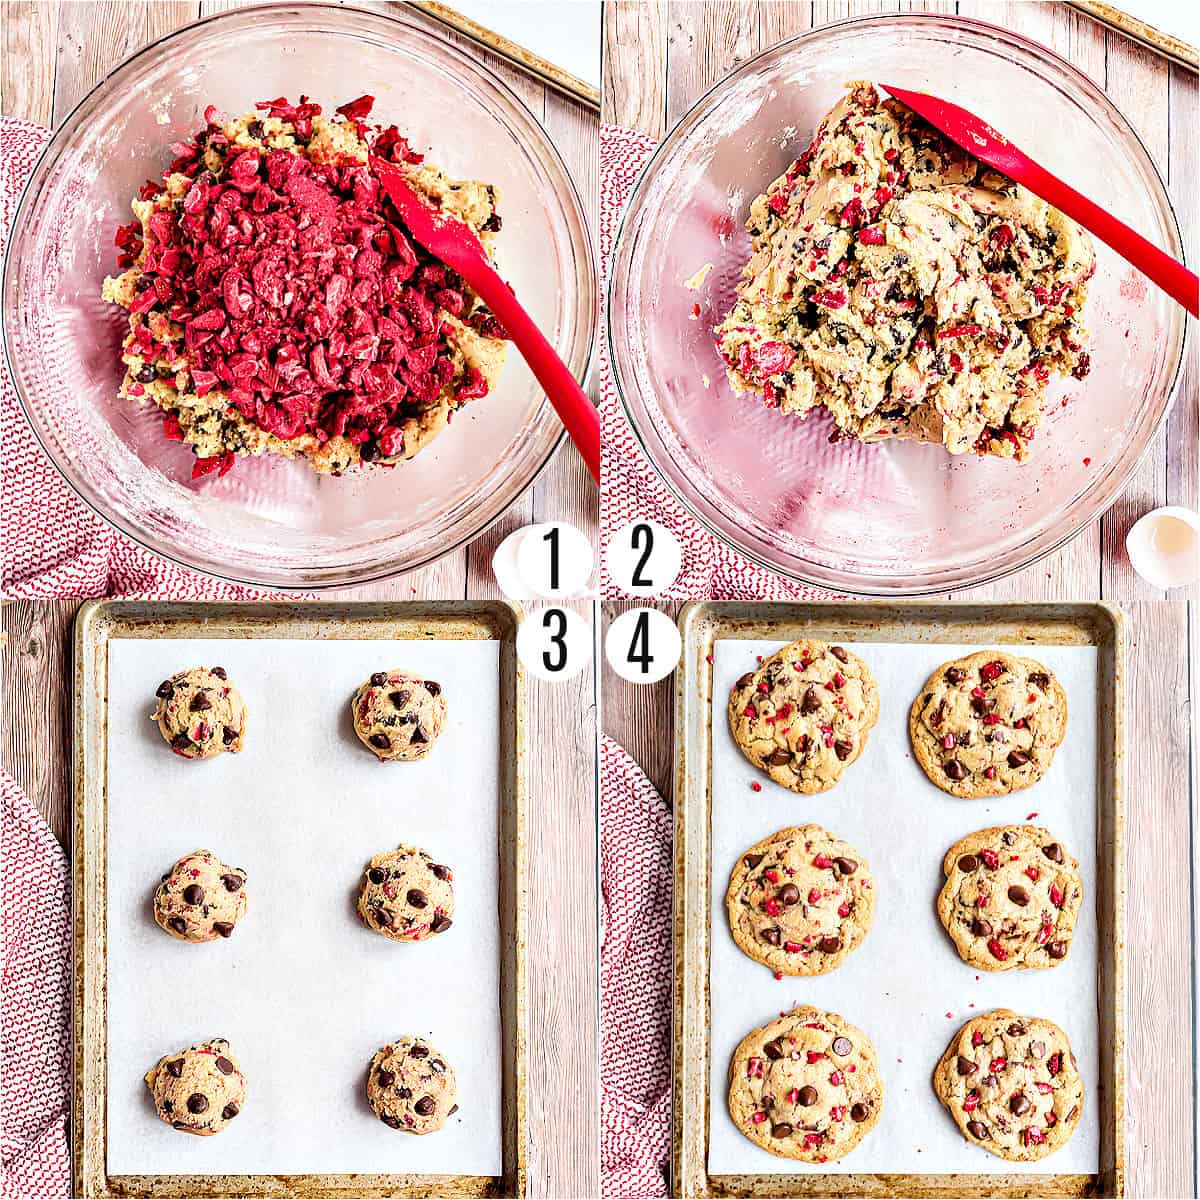 Step by step photos showing how to make chocolate chip strawberry cookies.